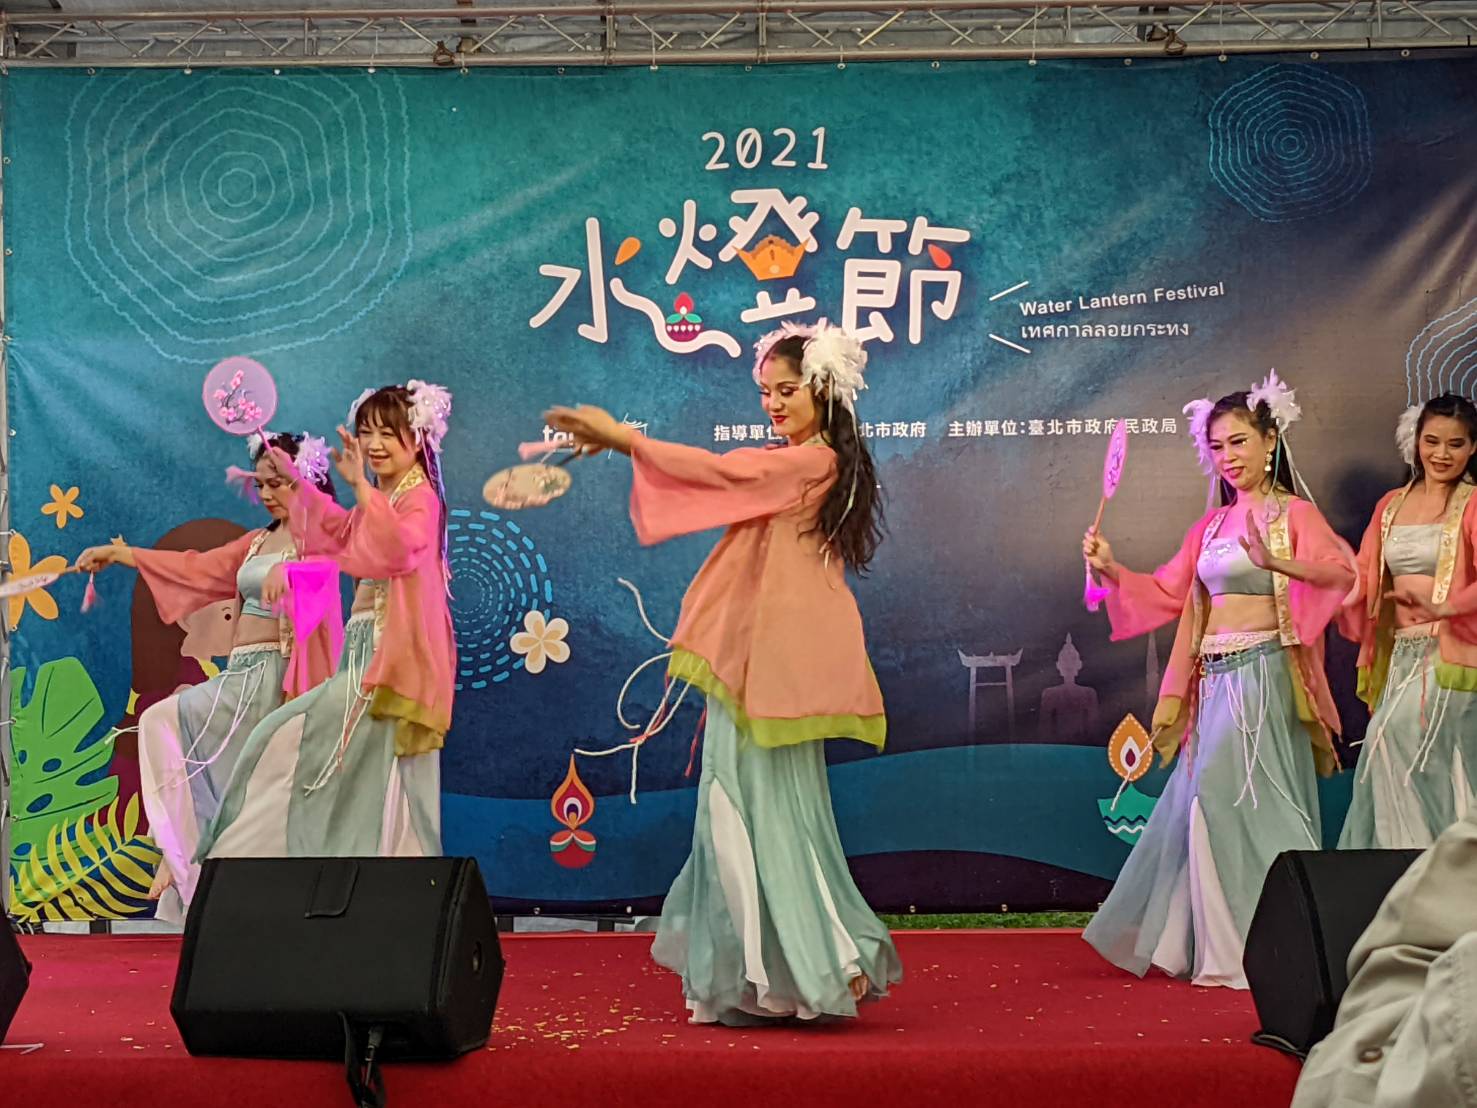 Free cultural activities at the event. (Photo / Provided by the Taiwan Immigrants' Global News Network)